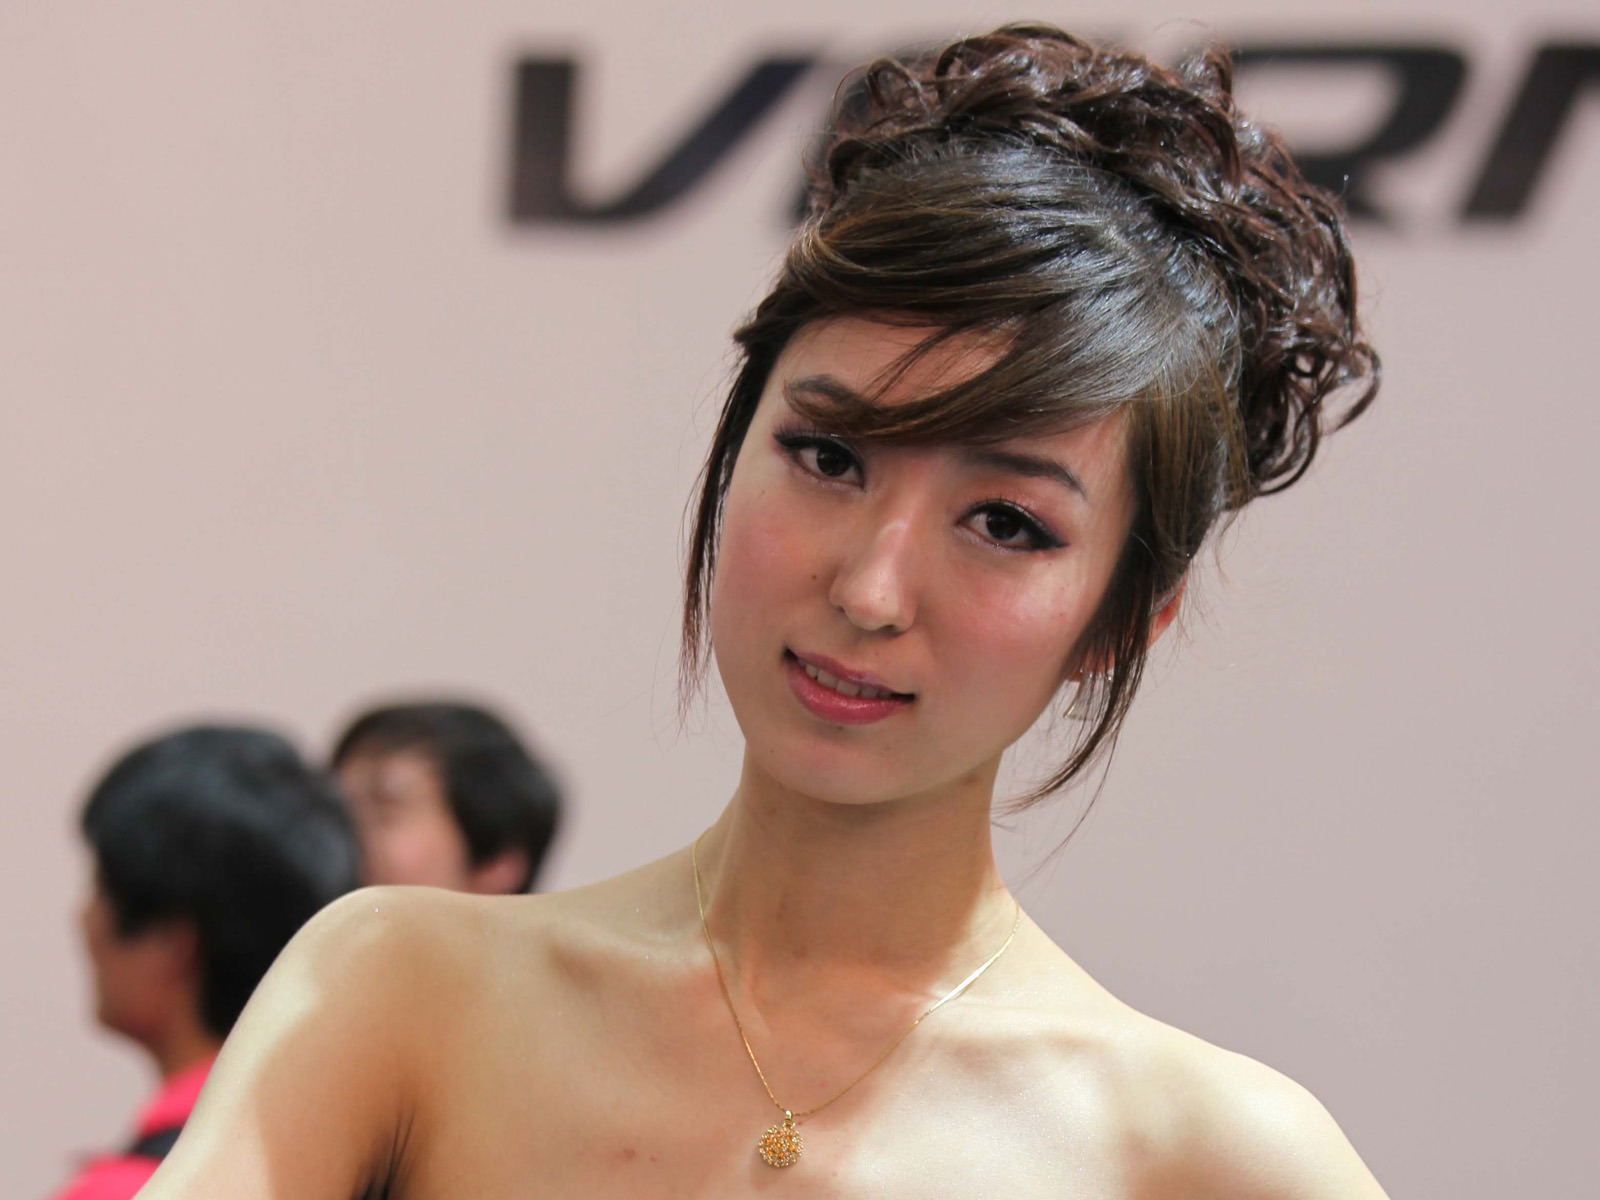 2010 Beijing International Auto Show beauty (2) (the wind chasing the clouds works) #20 - 1600x1200